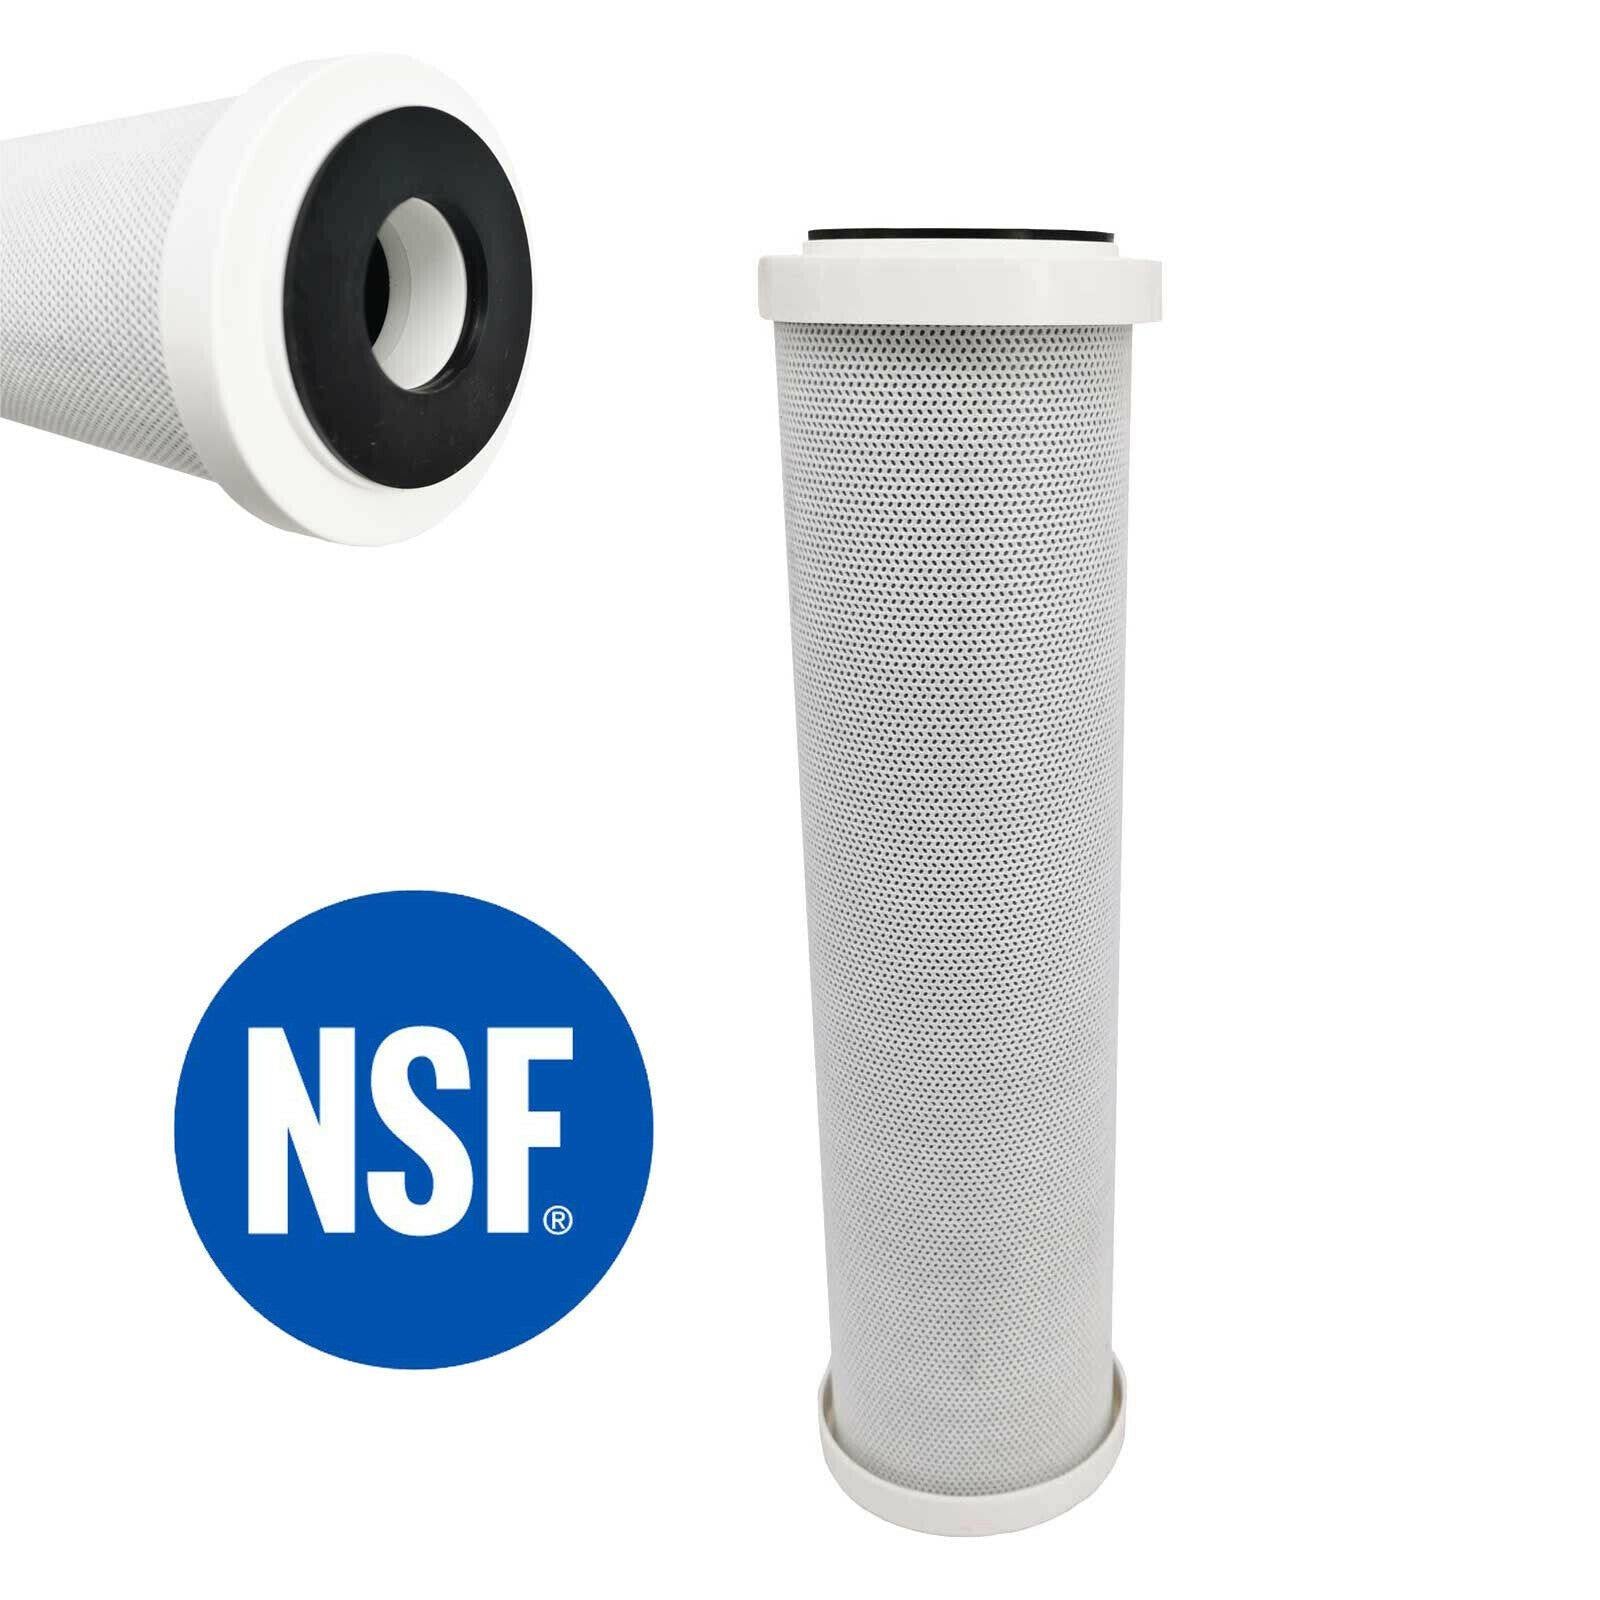 2 X 0.5 Micron Water Filter Cartridges 10"X2.5" For Rust Particles Turbidity Sparesbarn